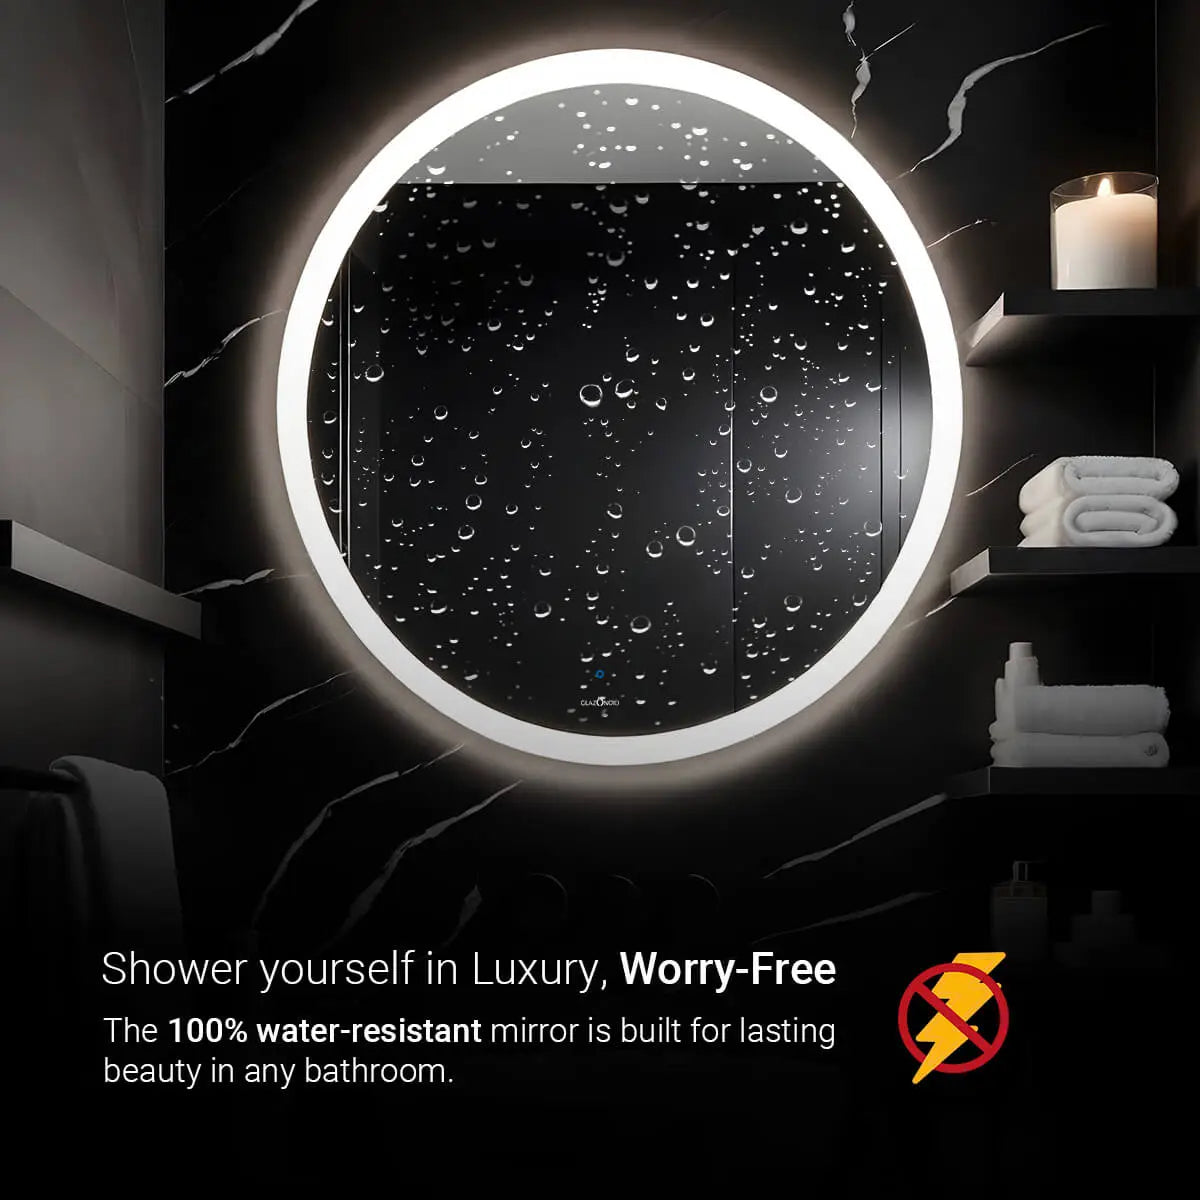 Modern, Round waterproof LED bathroom mirror with a touch sensor and a bright light. This mirror is perfect for applying makeup, shaving, or styling your hair. This mirror is waterproof and provides clear, bright illumination for your bathroom routine. Text overlay says "Shower yourself in Luxury, Worry-Free. The 100% water-resistant mirror is built for lasting beauty in any bathroom."